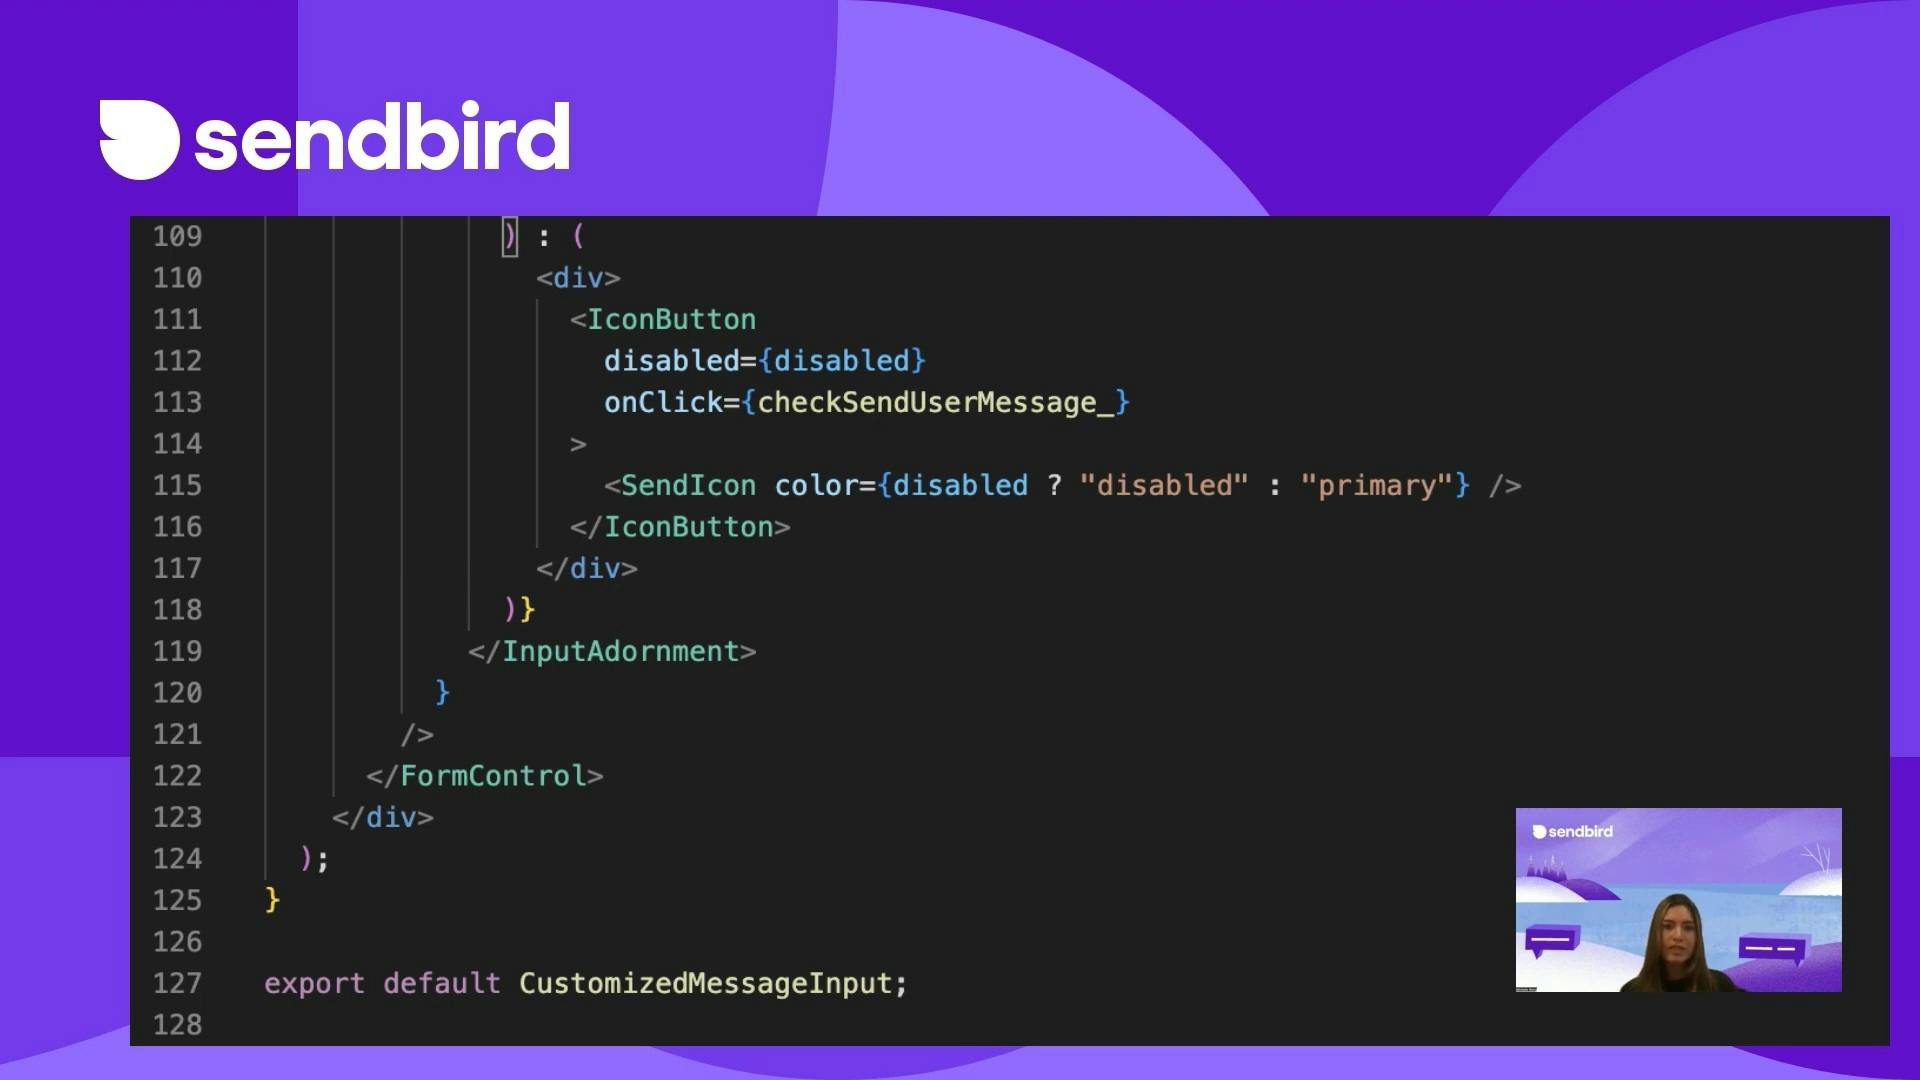 Build scheduled messages with the Sendbird UI Kit for React You Tube video thumbnail